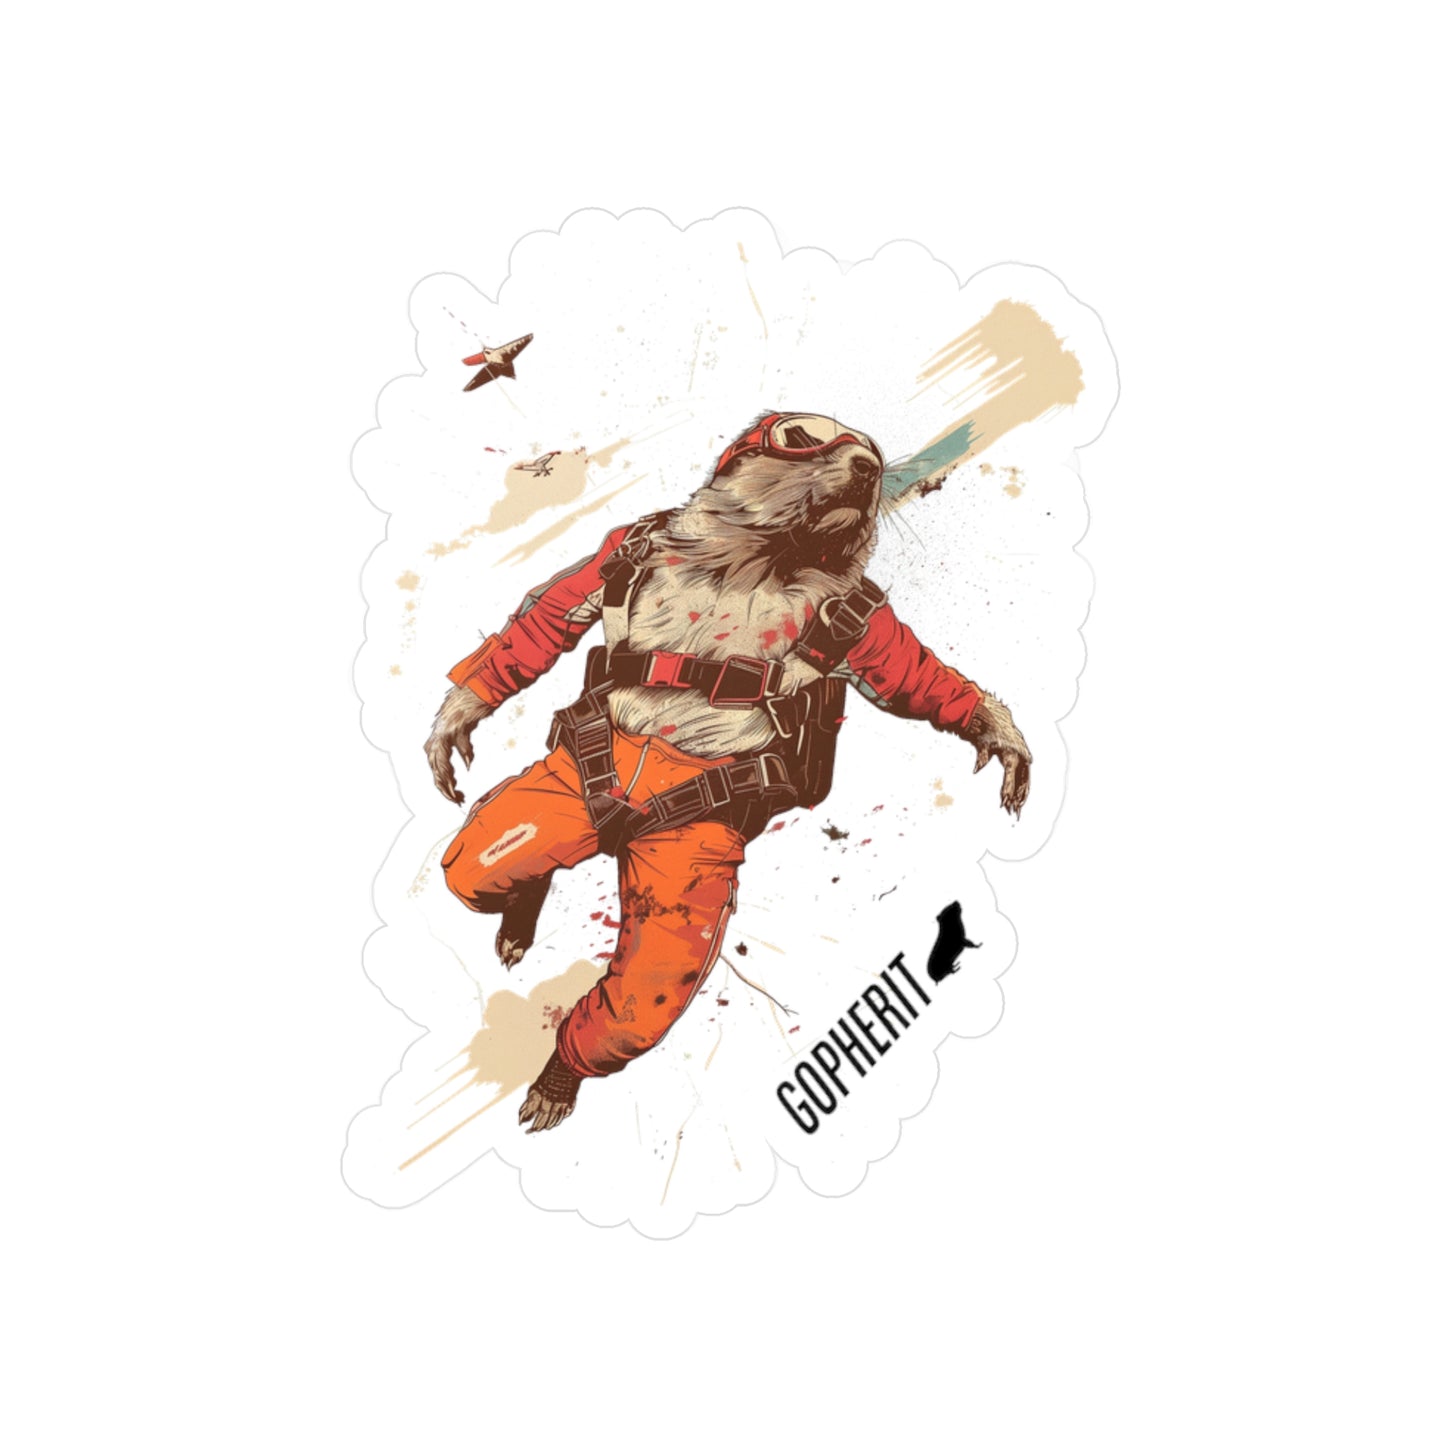 Gopher a Sticker - Gopher Skydiving